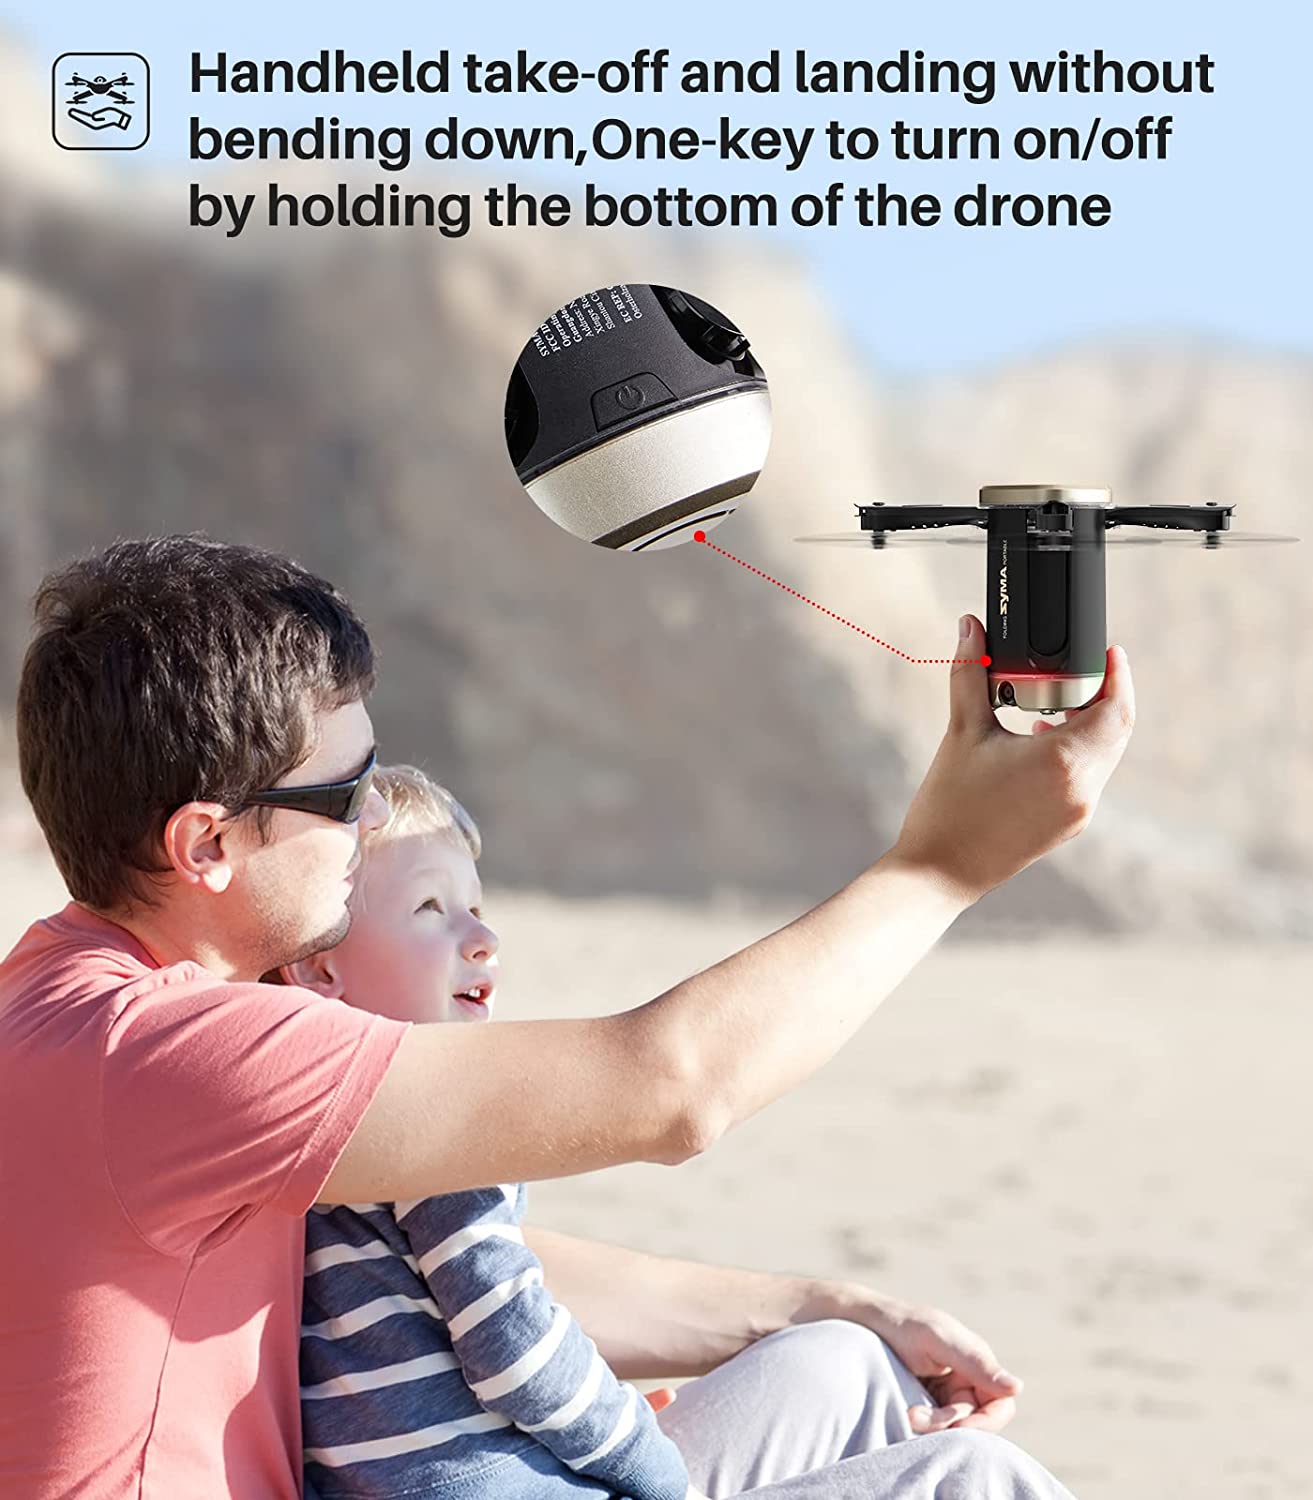 Drone for Kids, Spacekey FPV Wi-Fi Drone with Camera 1080P FHD, Real-time  Video Feed, Great Drone for Beginners, Quadcopter Drone with Altitude Hold